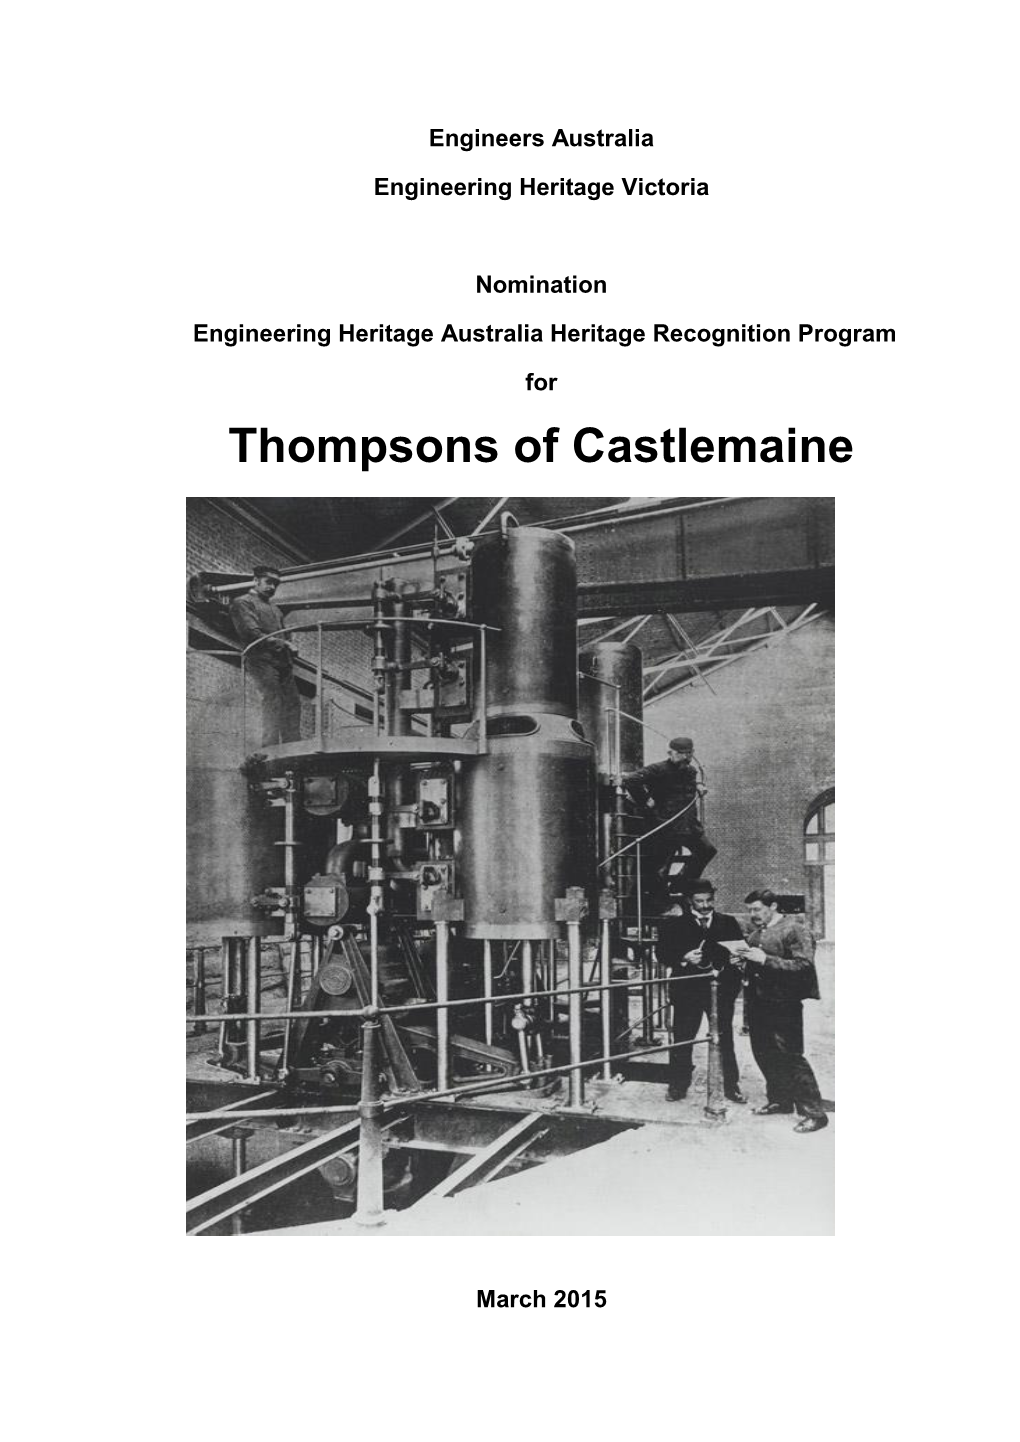 Thompsons of Castlemaine